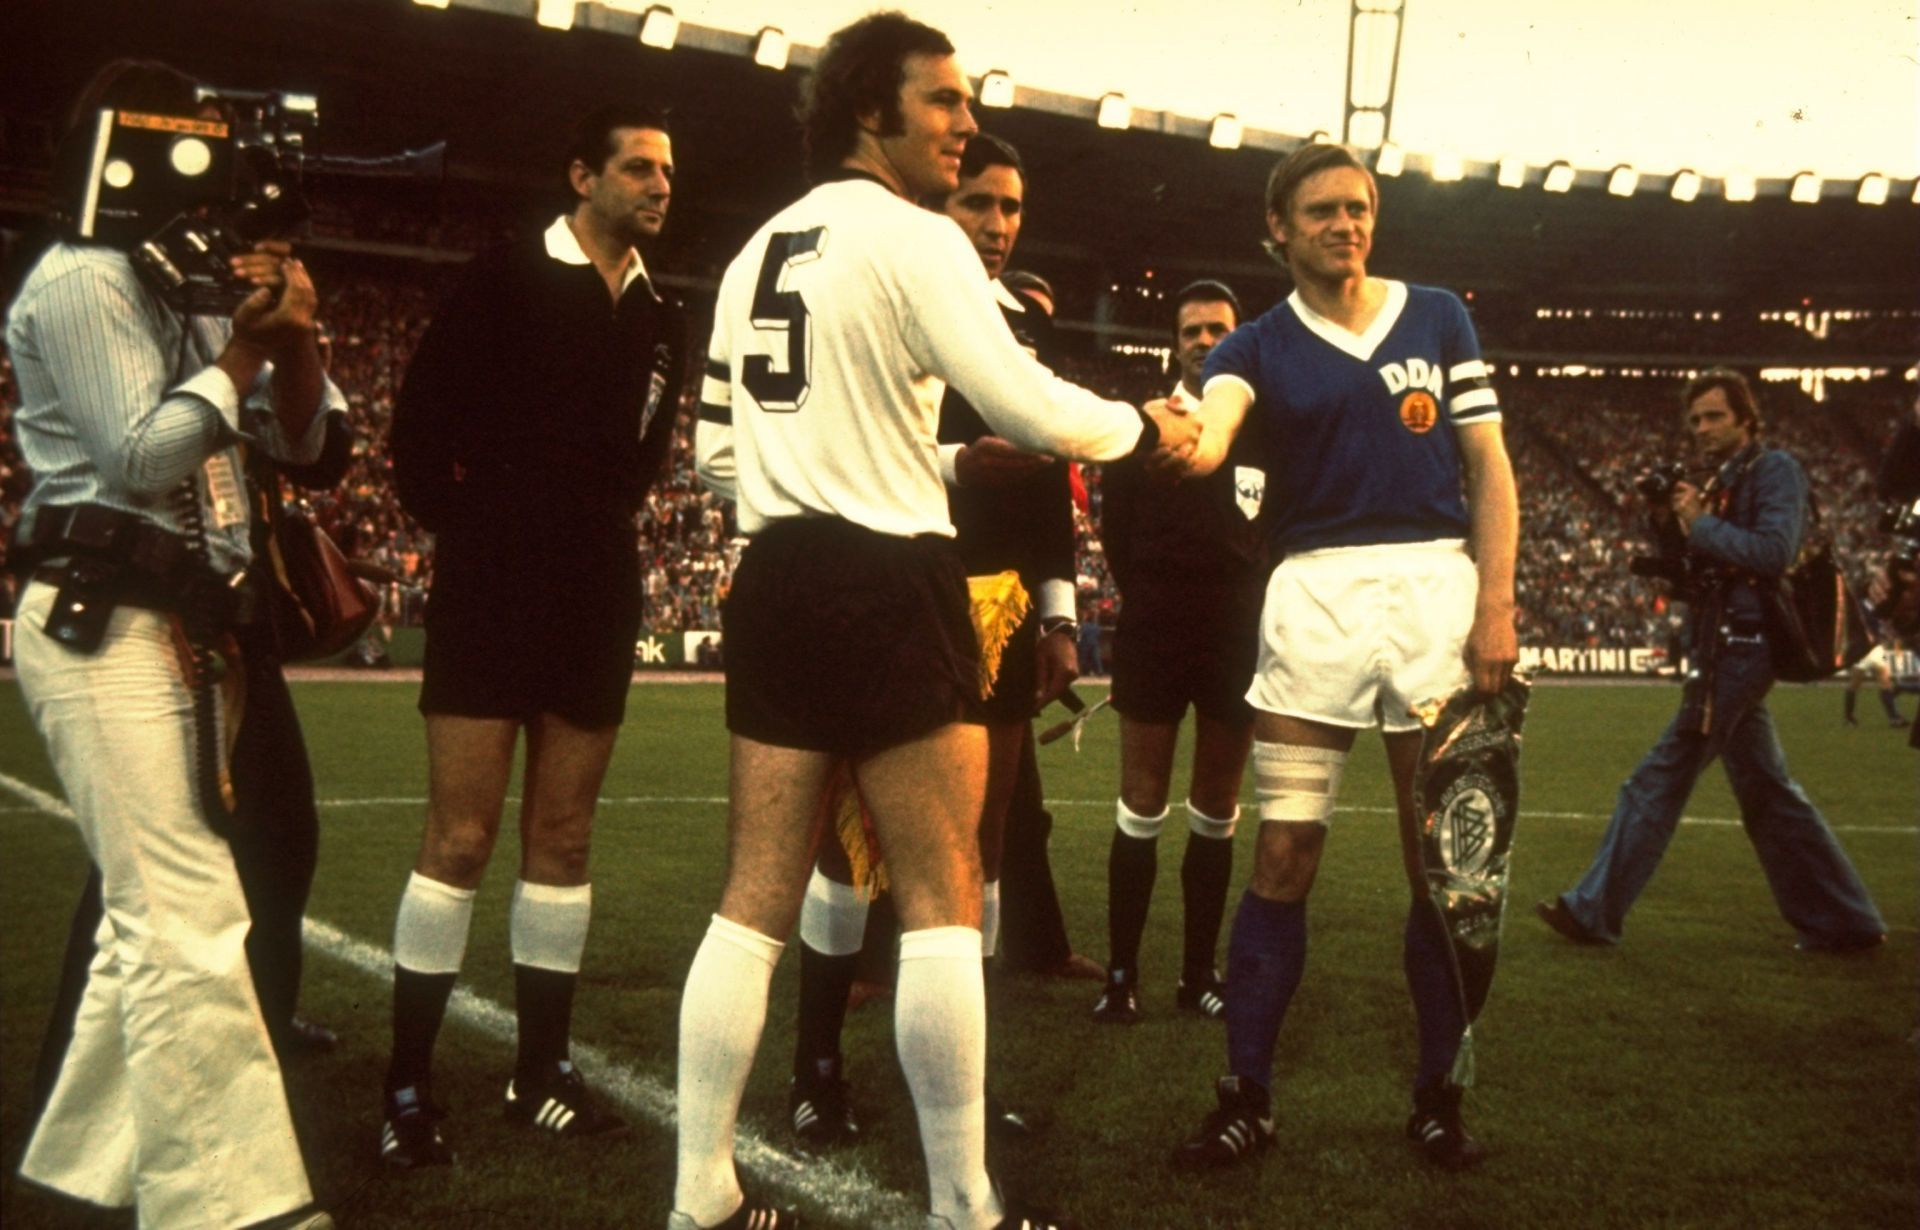 Franz Beckenbauer (#5) is arguably the greatest player Germany has ever produced.